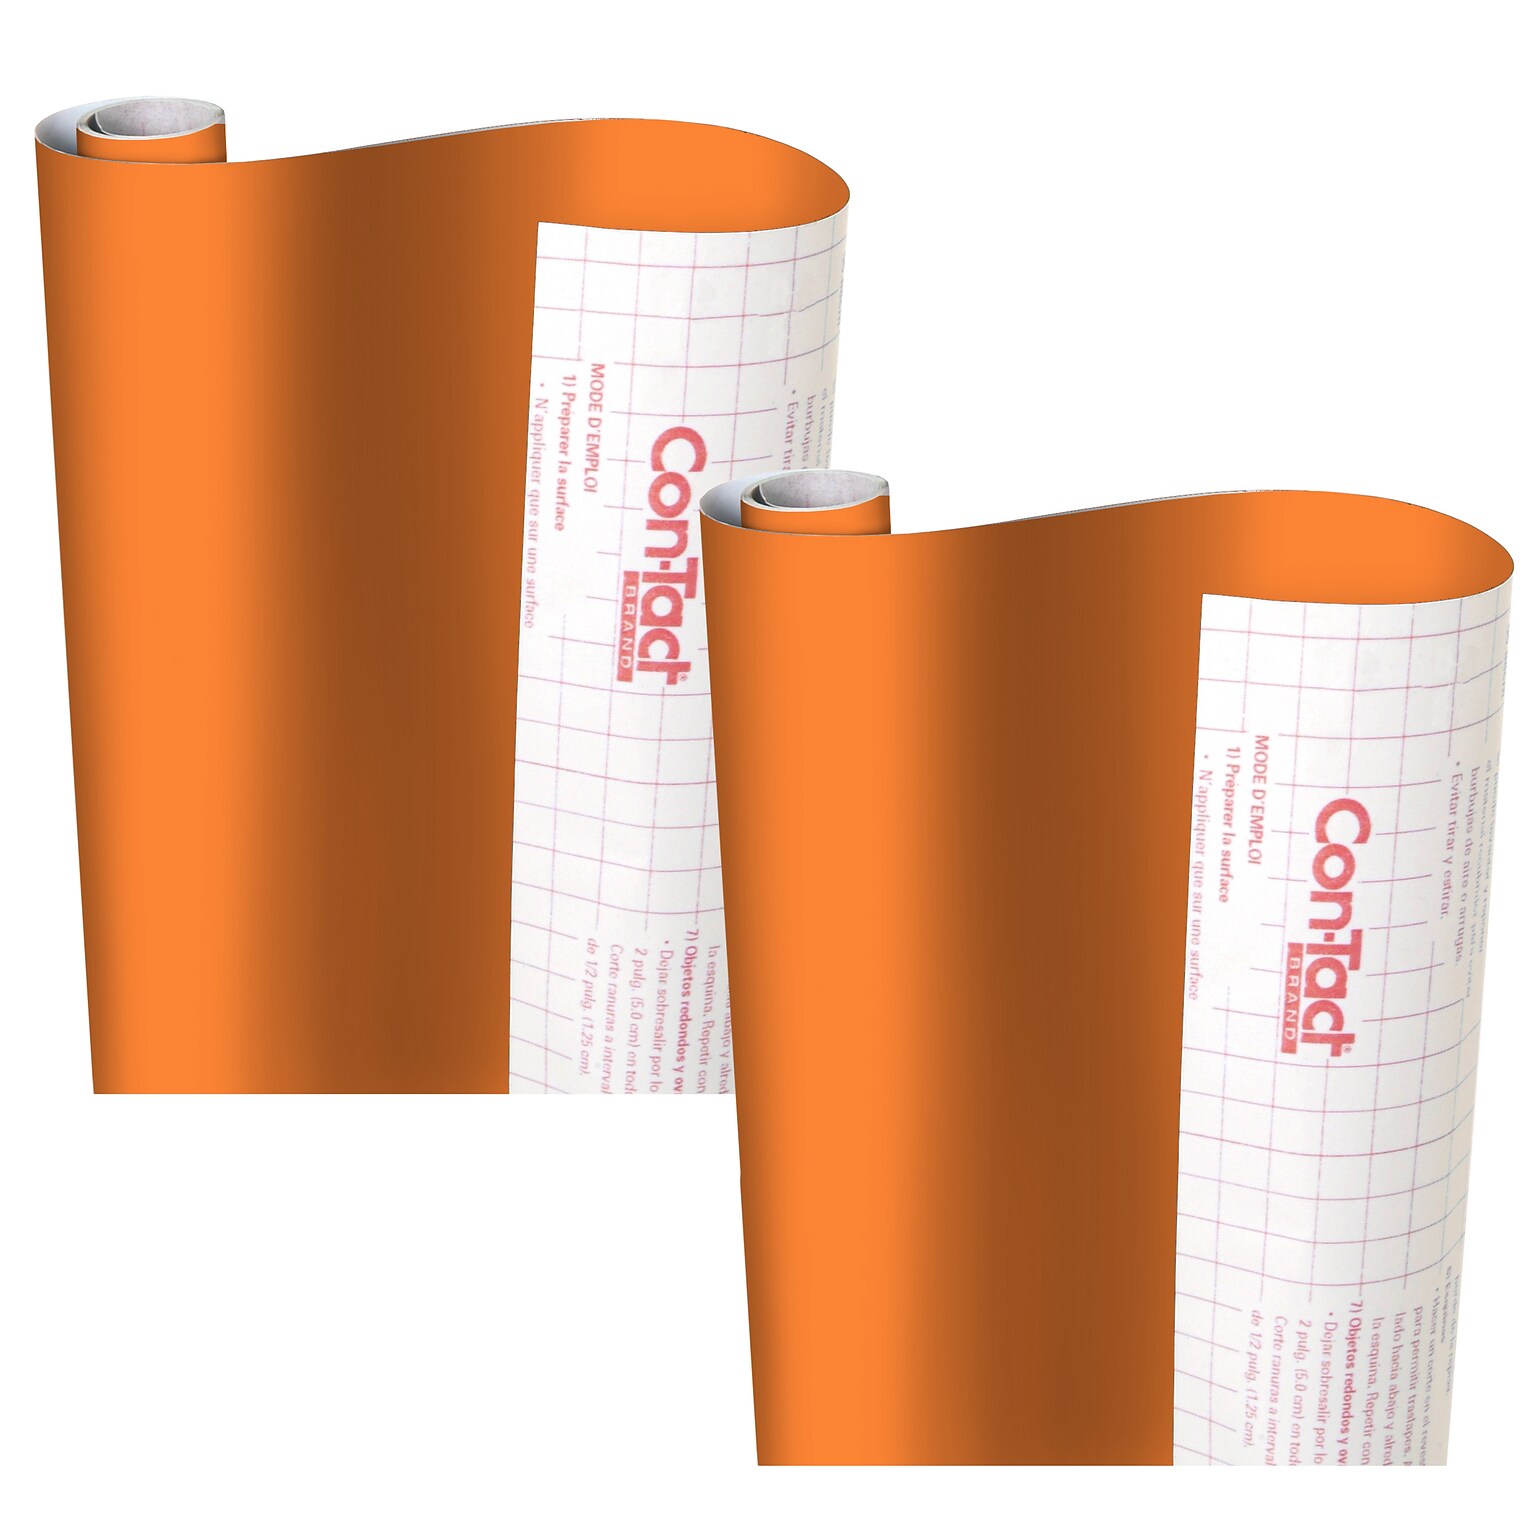 Con-Tact Creative Covering™ Adhesive Covering, 18 x 16 Per Roll, Orange, 2 Rolls (KIT16FC9A1K206-2)